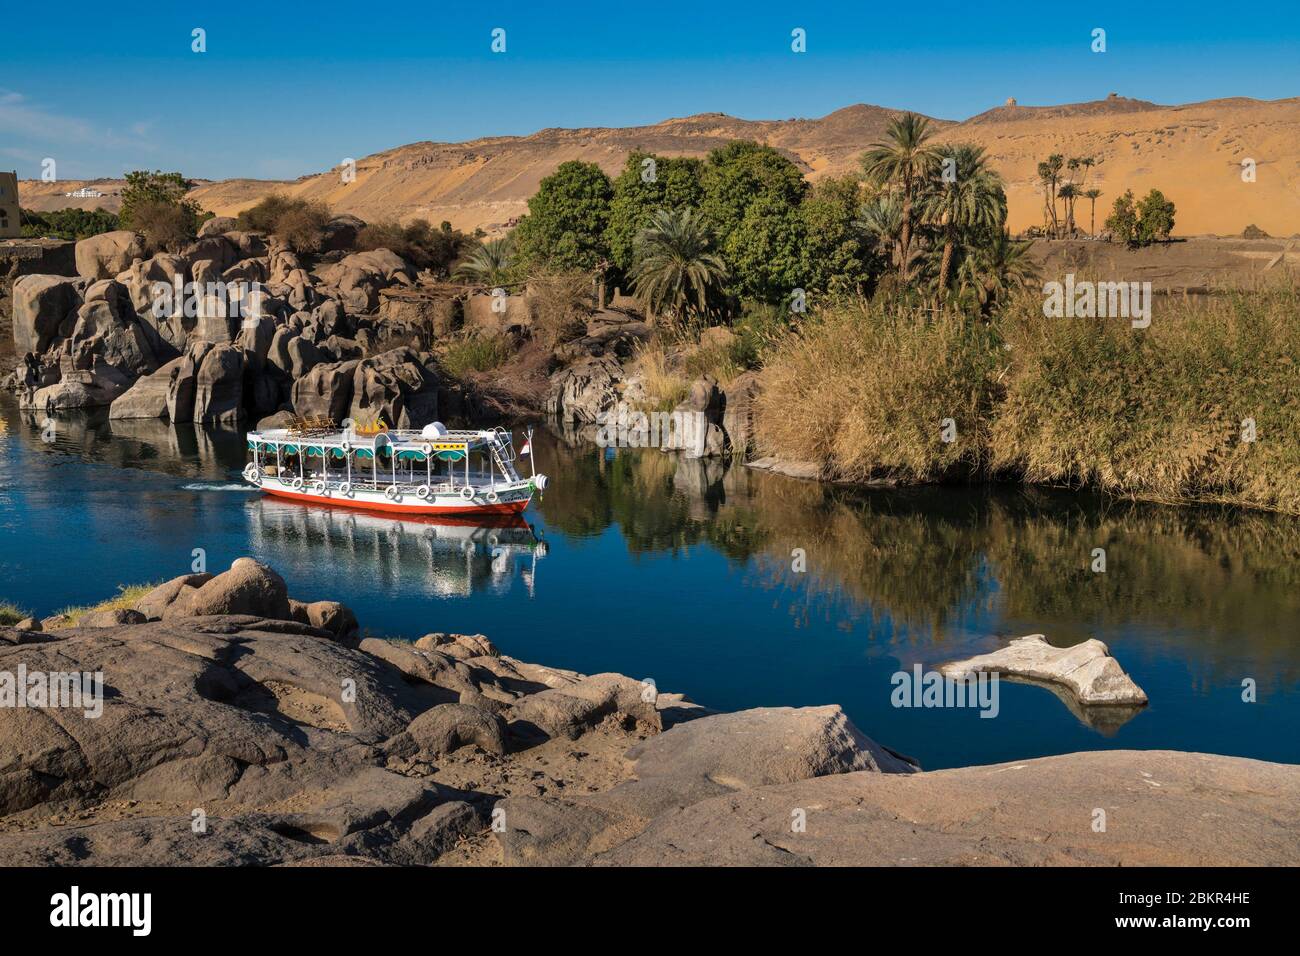 Egypt, Upper Egypt, Nile valley, Aswan, touristic boat on the Nile in front of Elephantine island with Aga Khan Mausoleum in the background Stock Photo